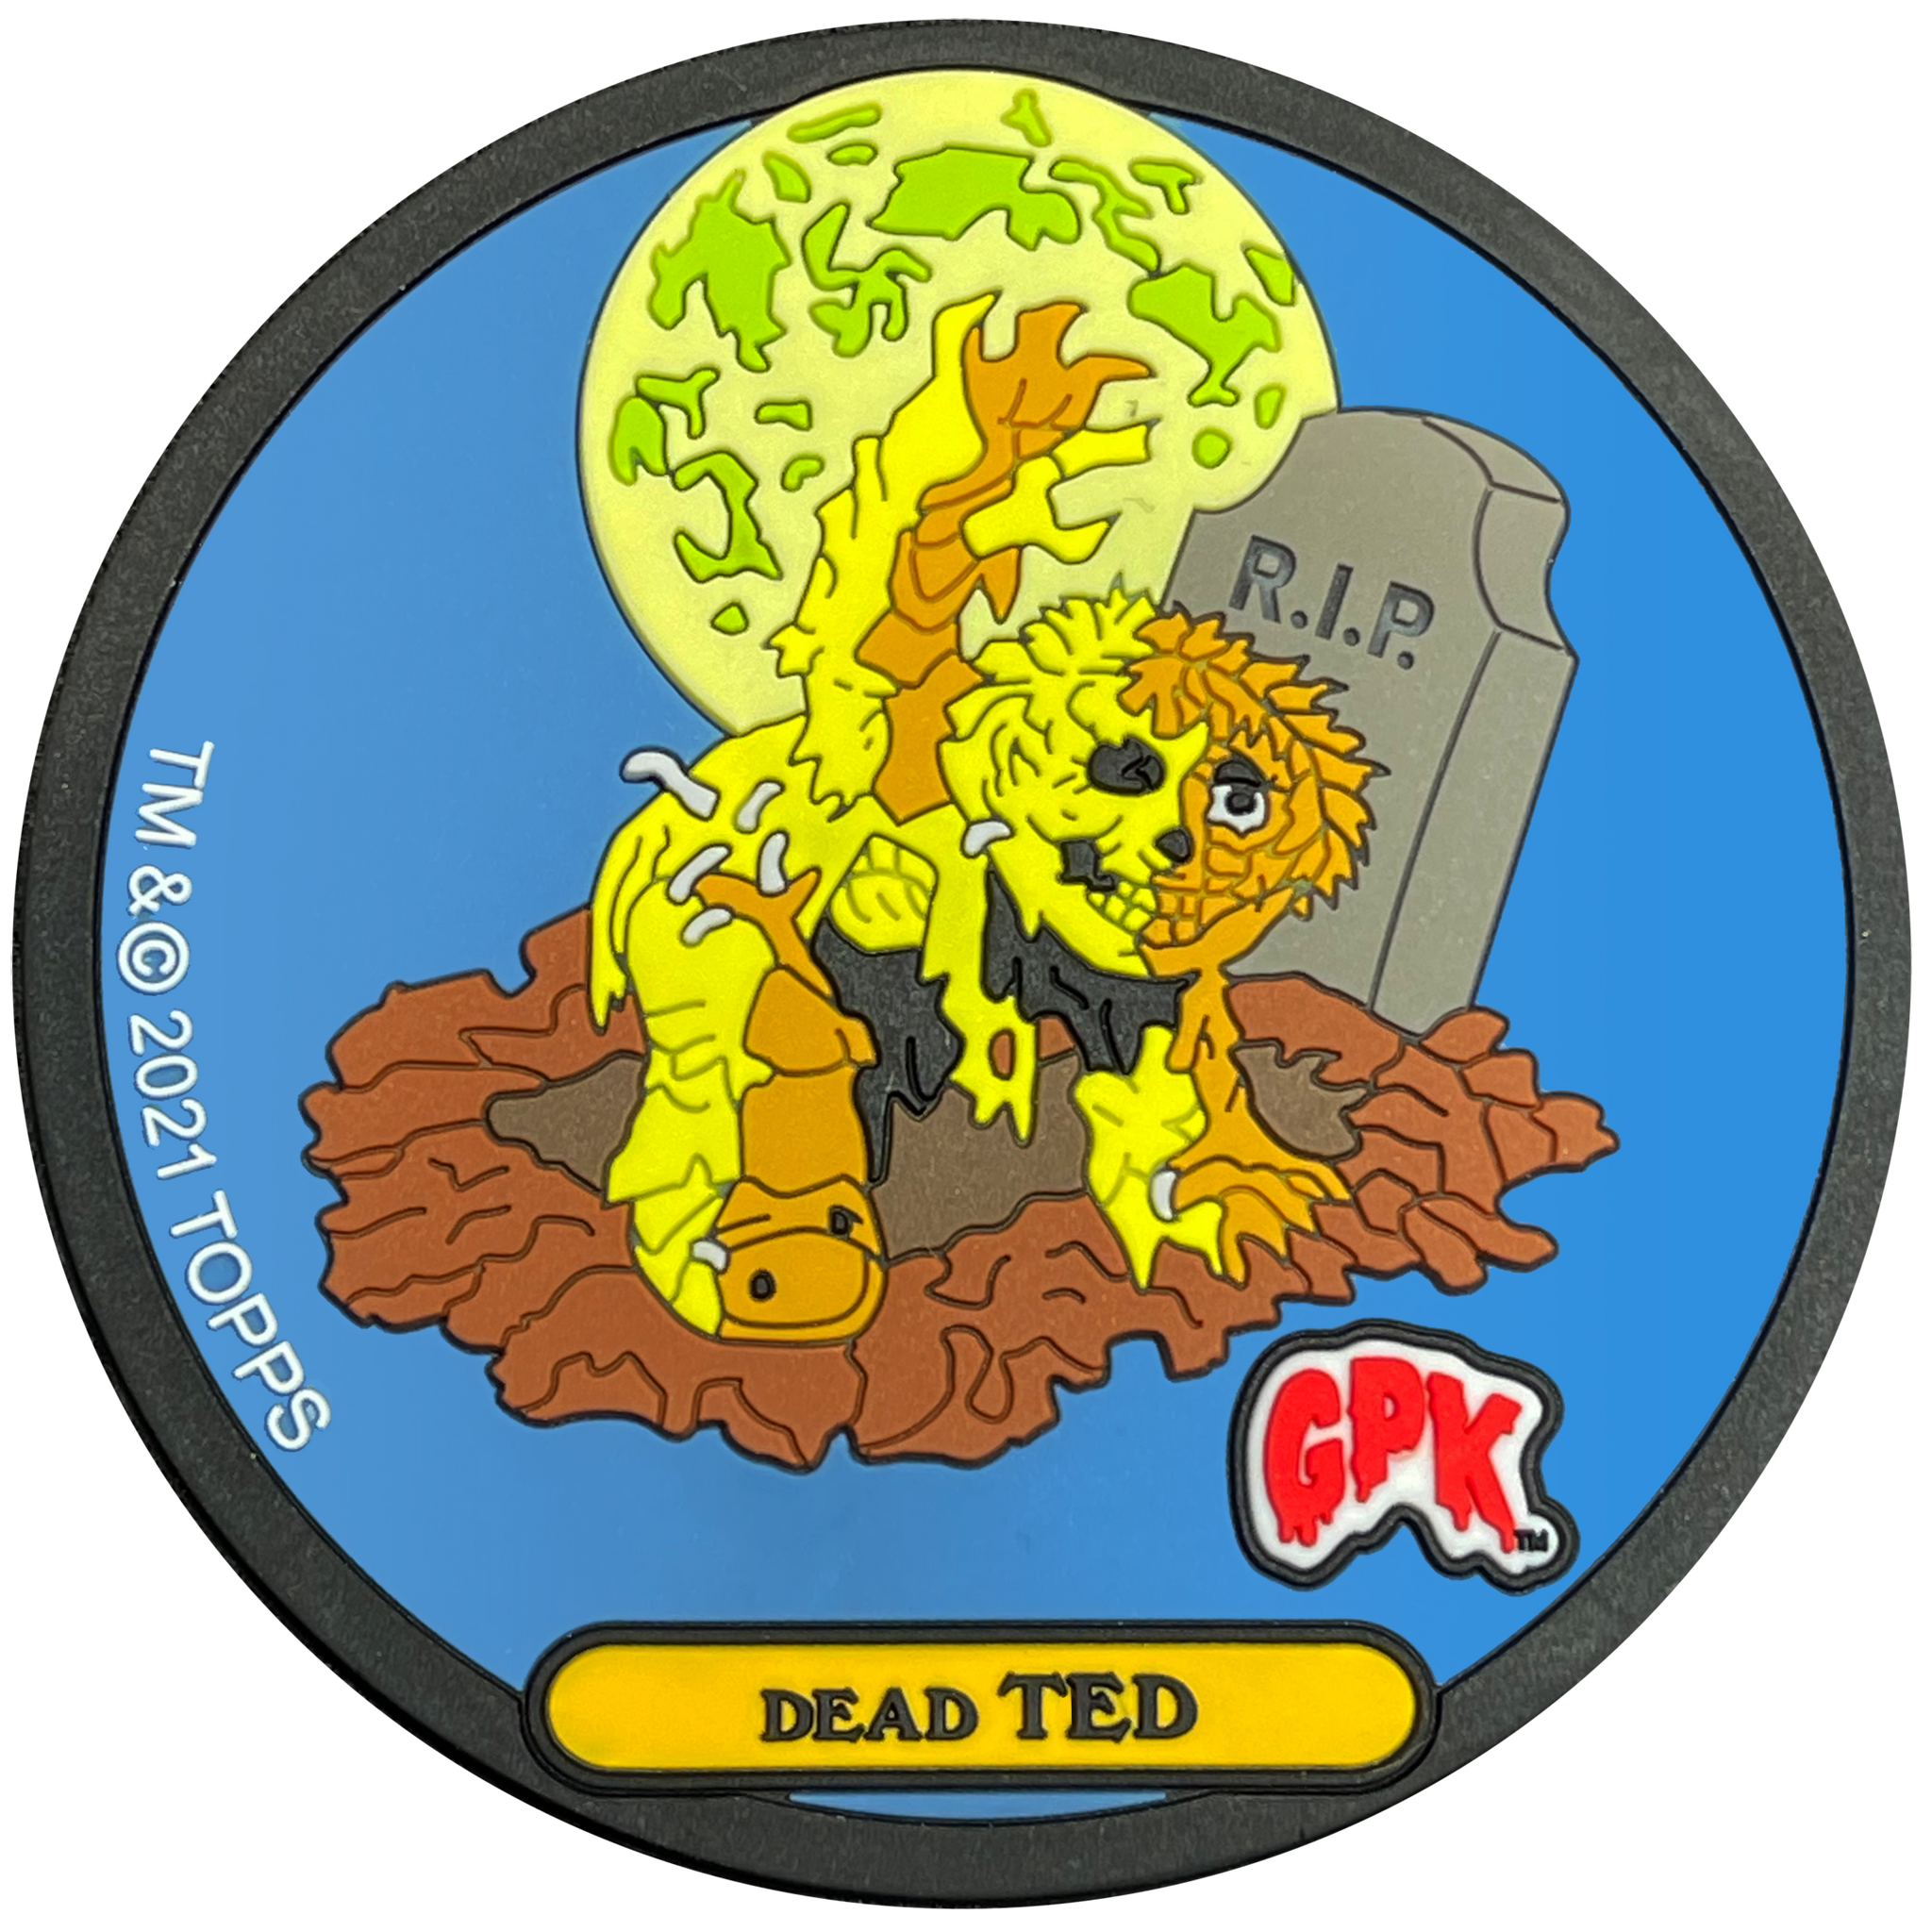 GPK-DD-006 Dead Ted Exclusive Topps Officially Licensed "Glowster" GPK Garbage Pail Kids Coaster